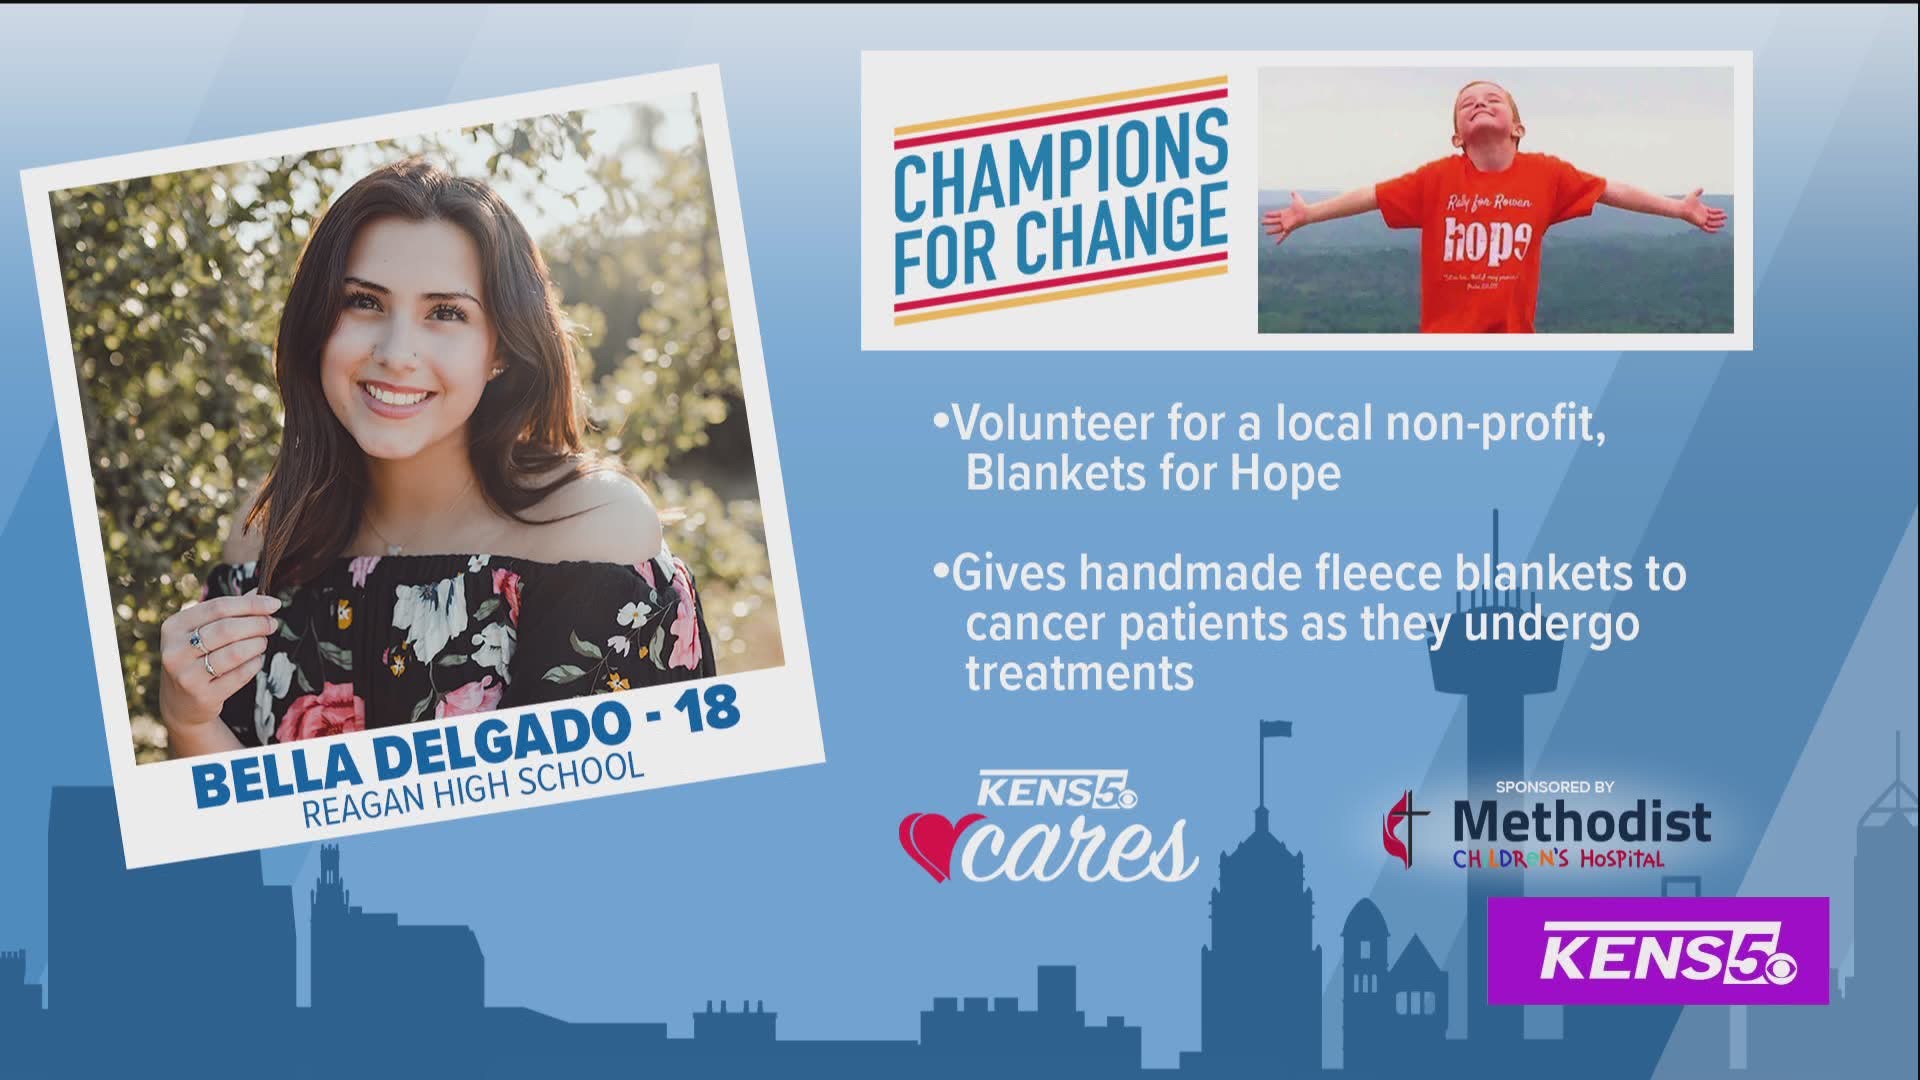 One of our Champions for Change is 18-year-old Bella Delgado from Reagan High School. She is volunteer for the non-profit group, Blankets for Hope.